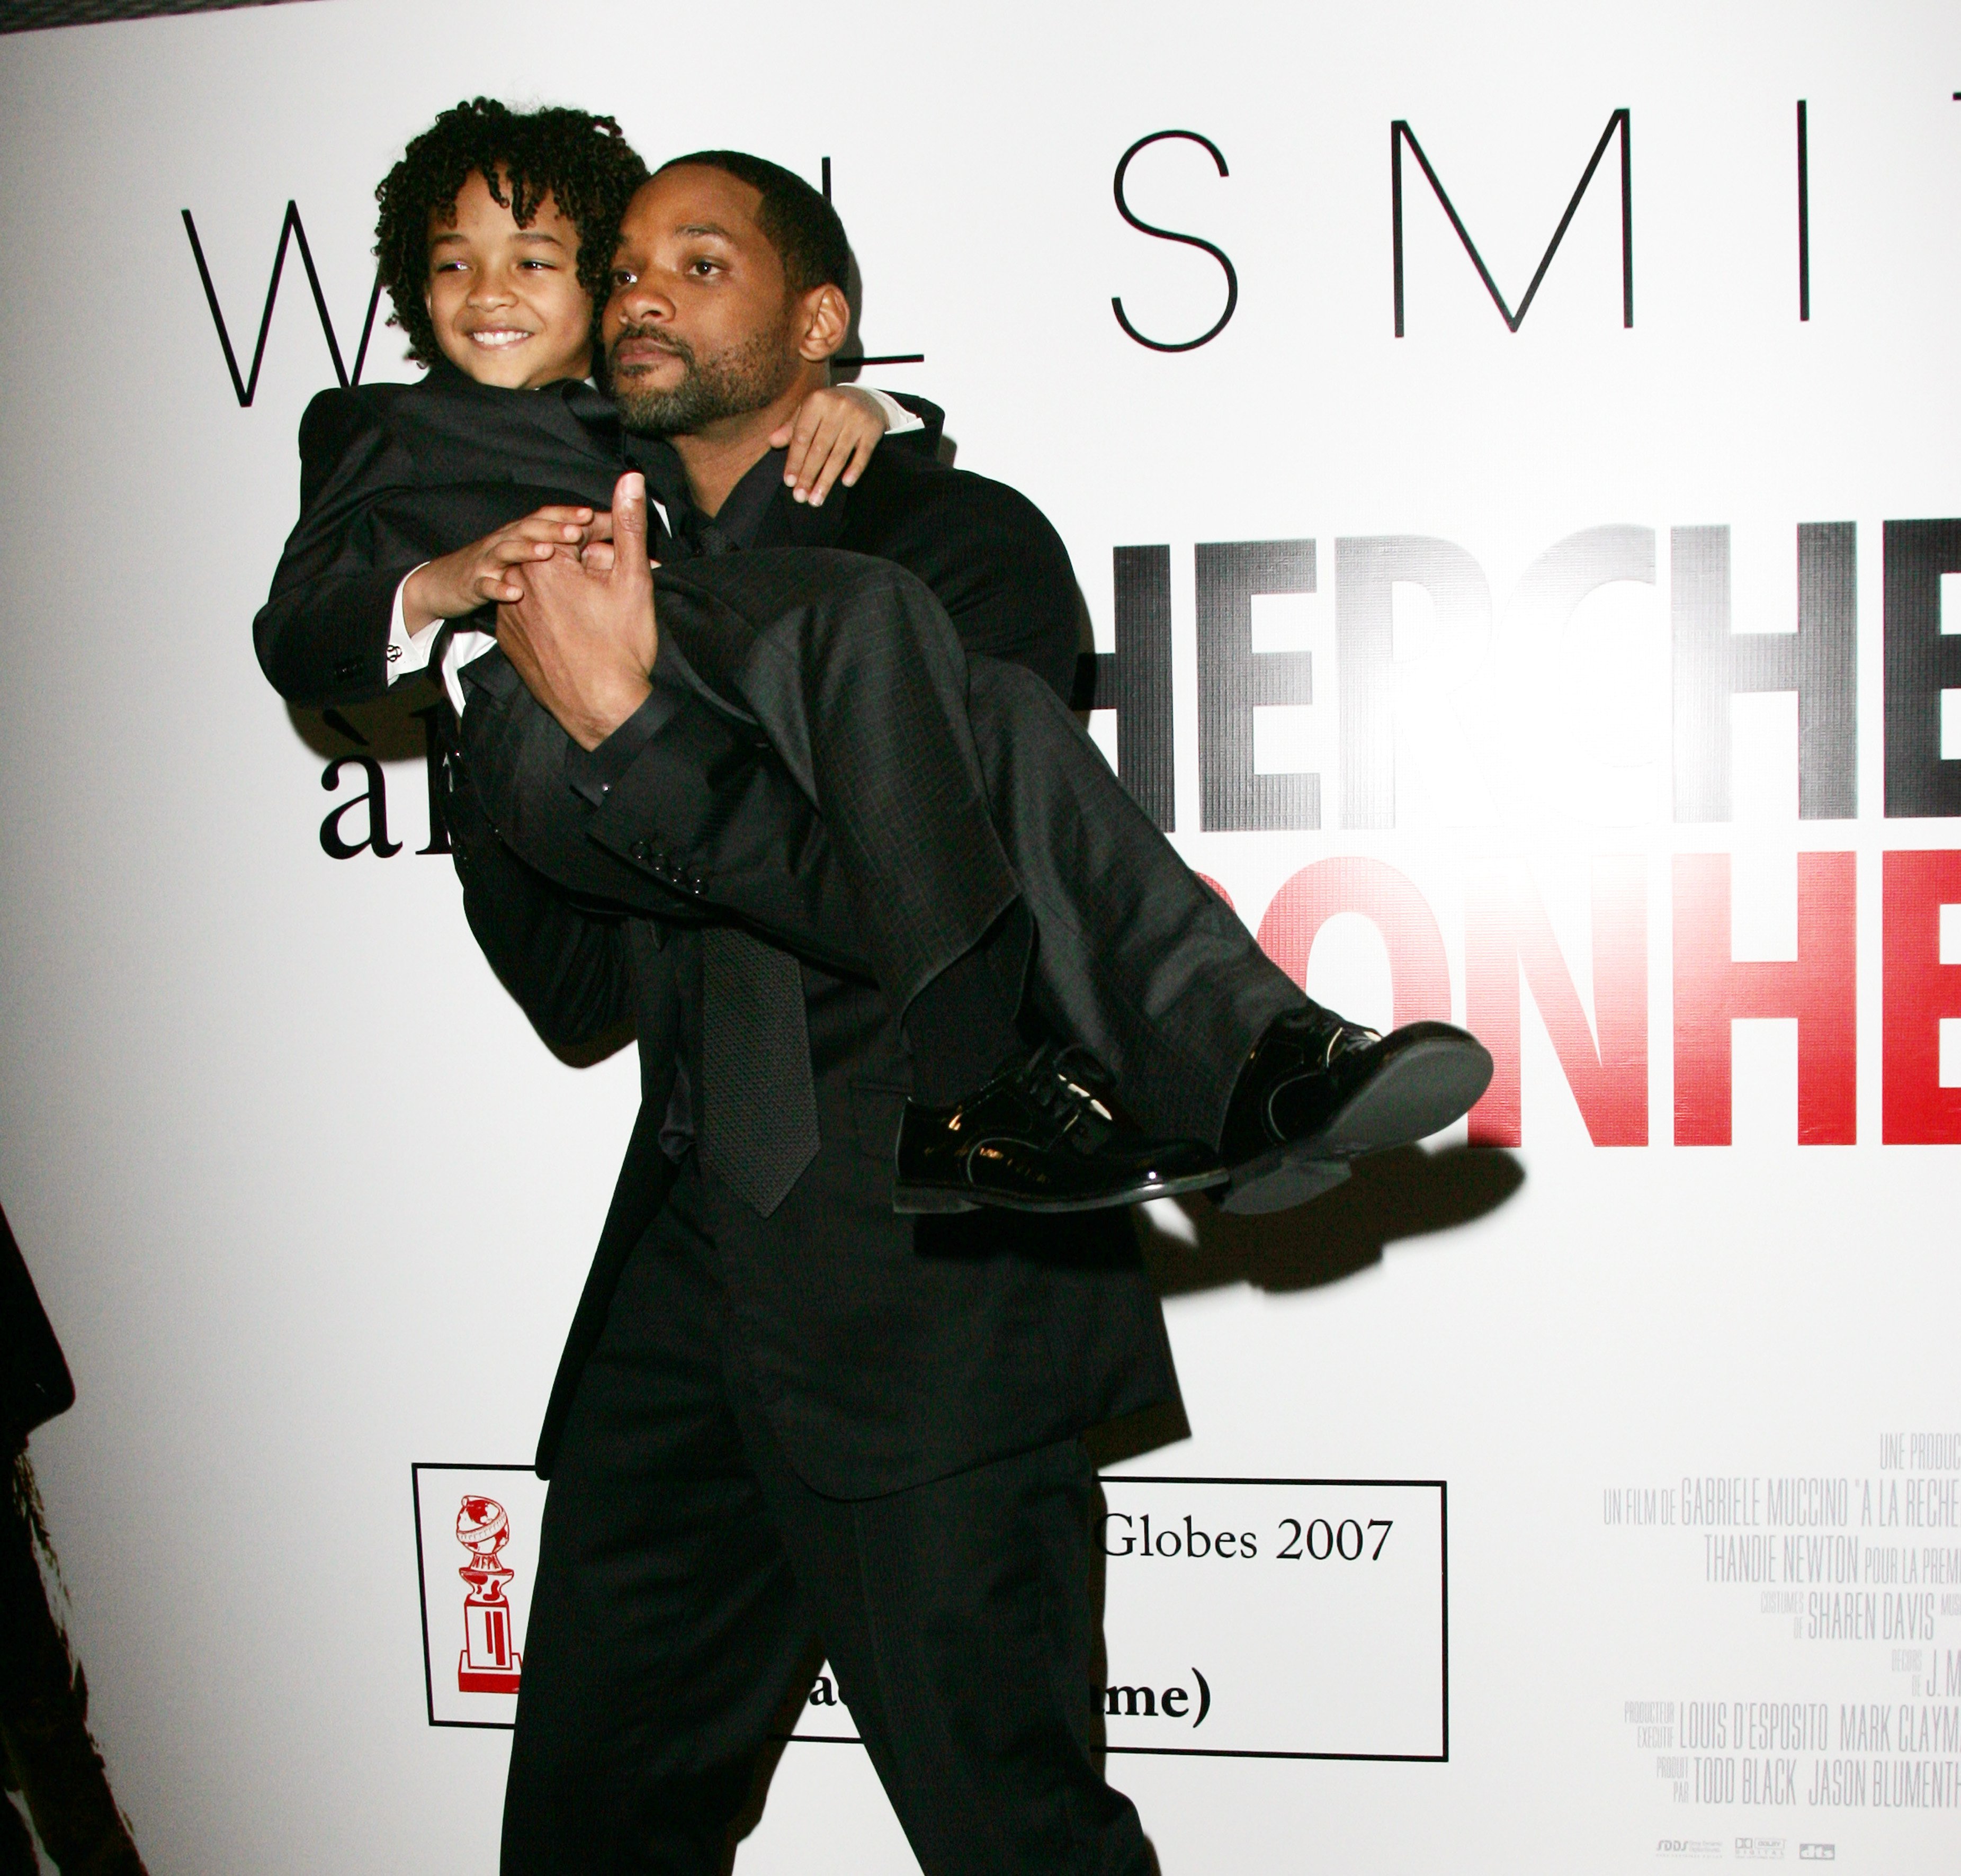 Will and Jaden Smith during "The Pursuit of Happyness" Paris premiere in Paris, France on January 10, 2007. | Source: Toni Anne Barson/WireImage/Getty Images